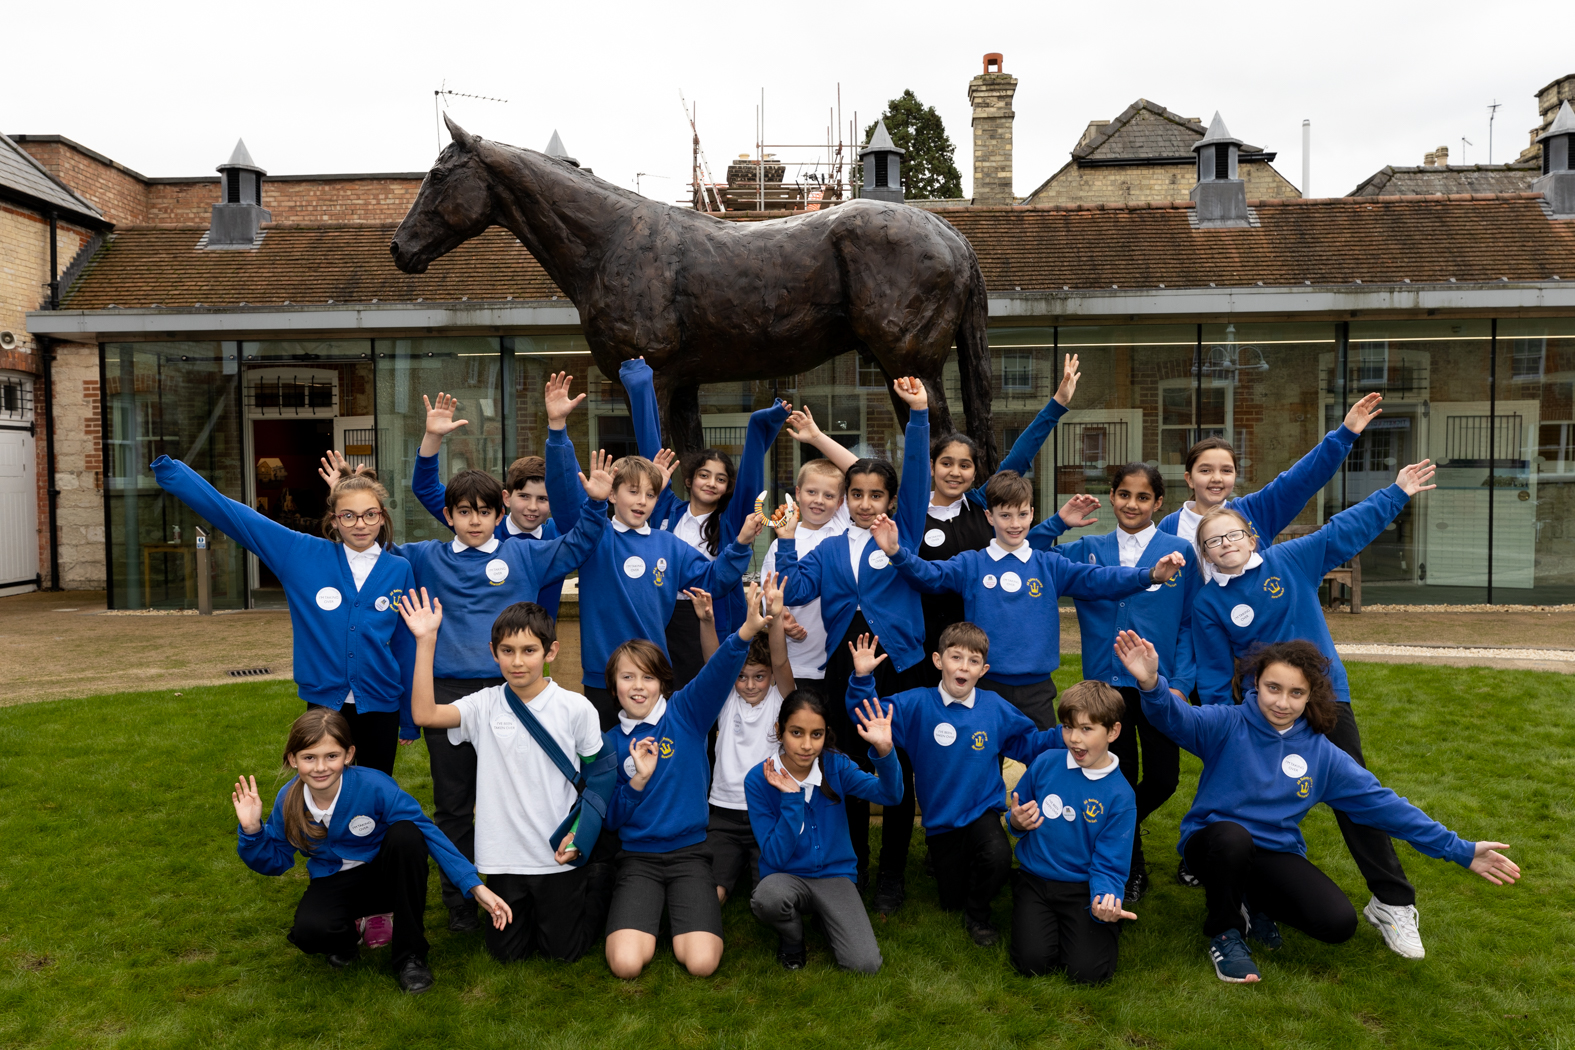 A group of uniformed primary school children grinning and holding their hands up in the air in front o a horse statue at the National Horseracing Museum.